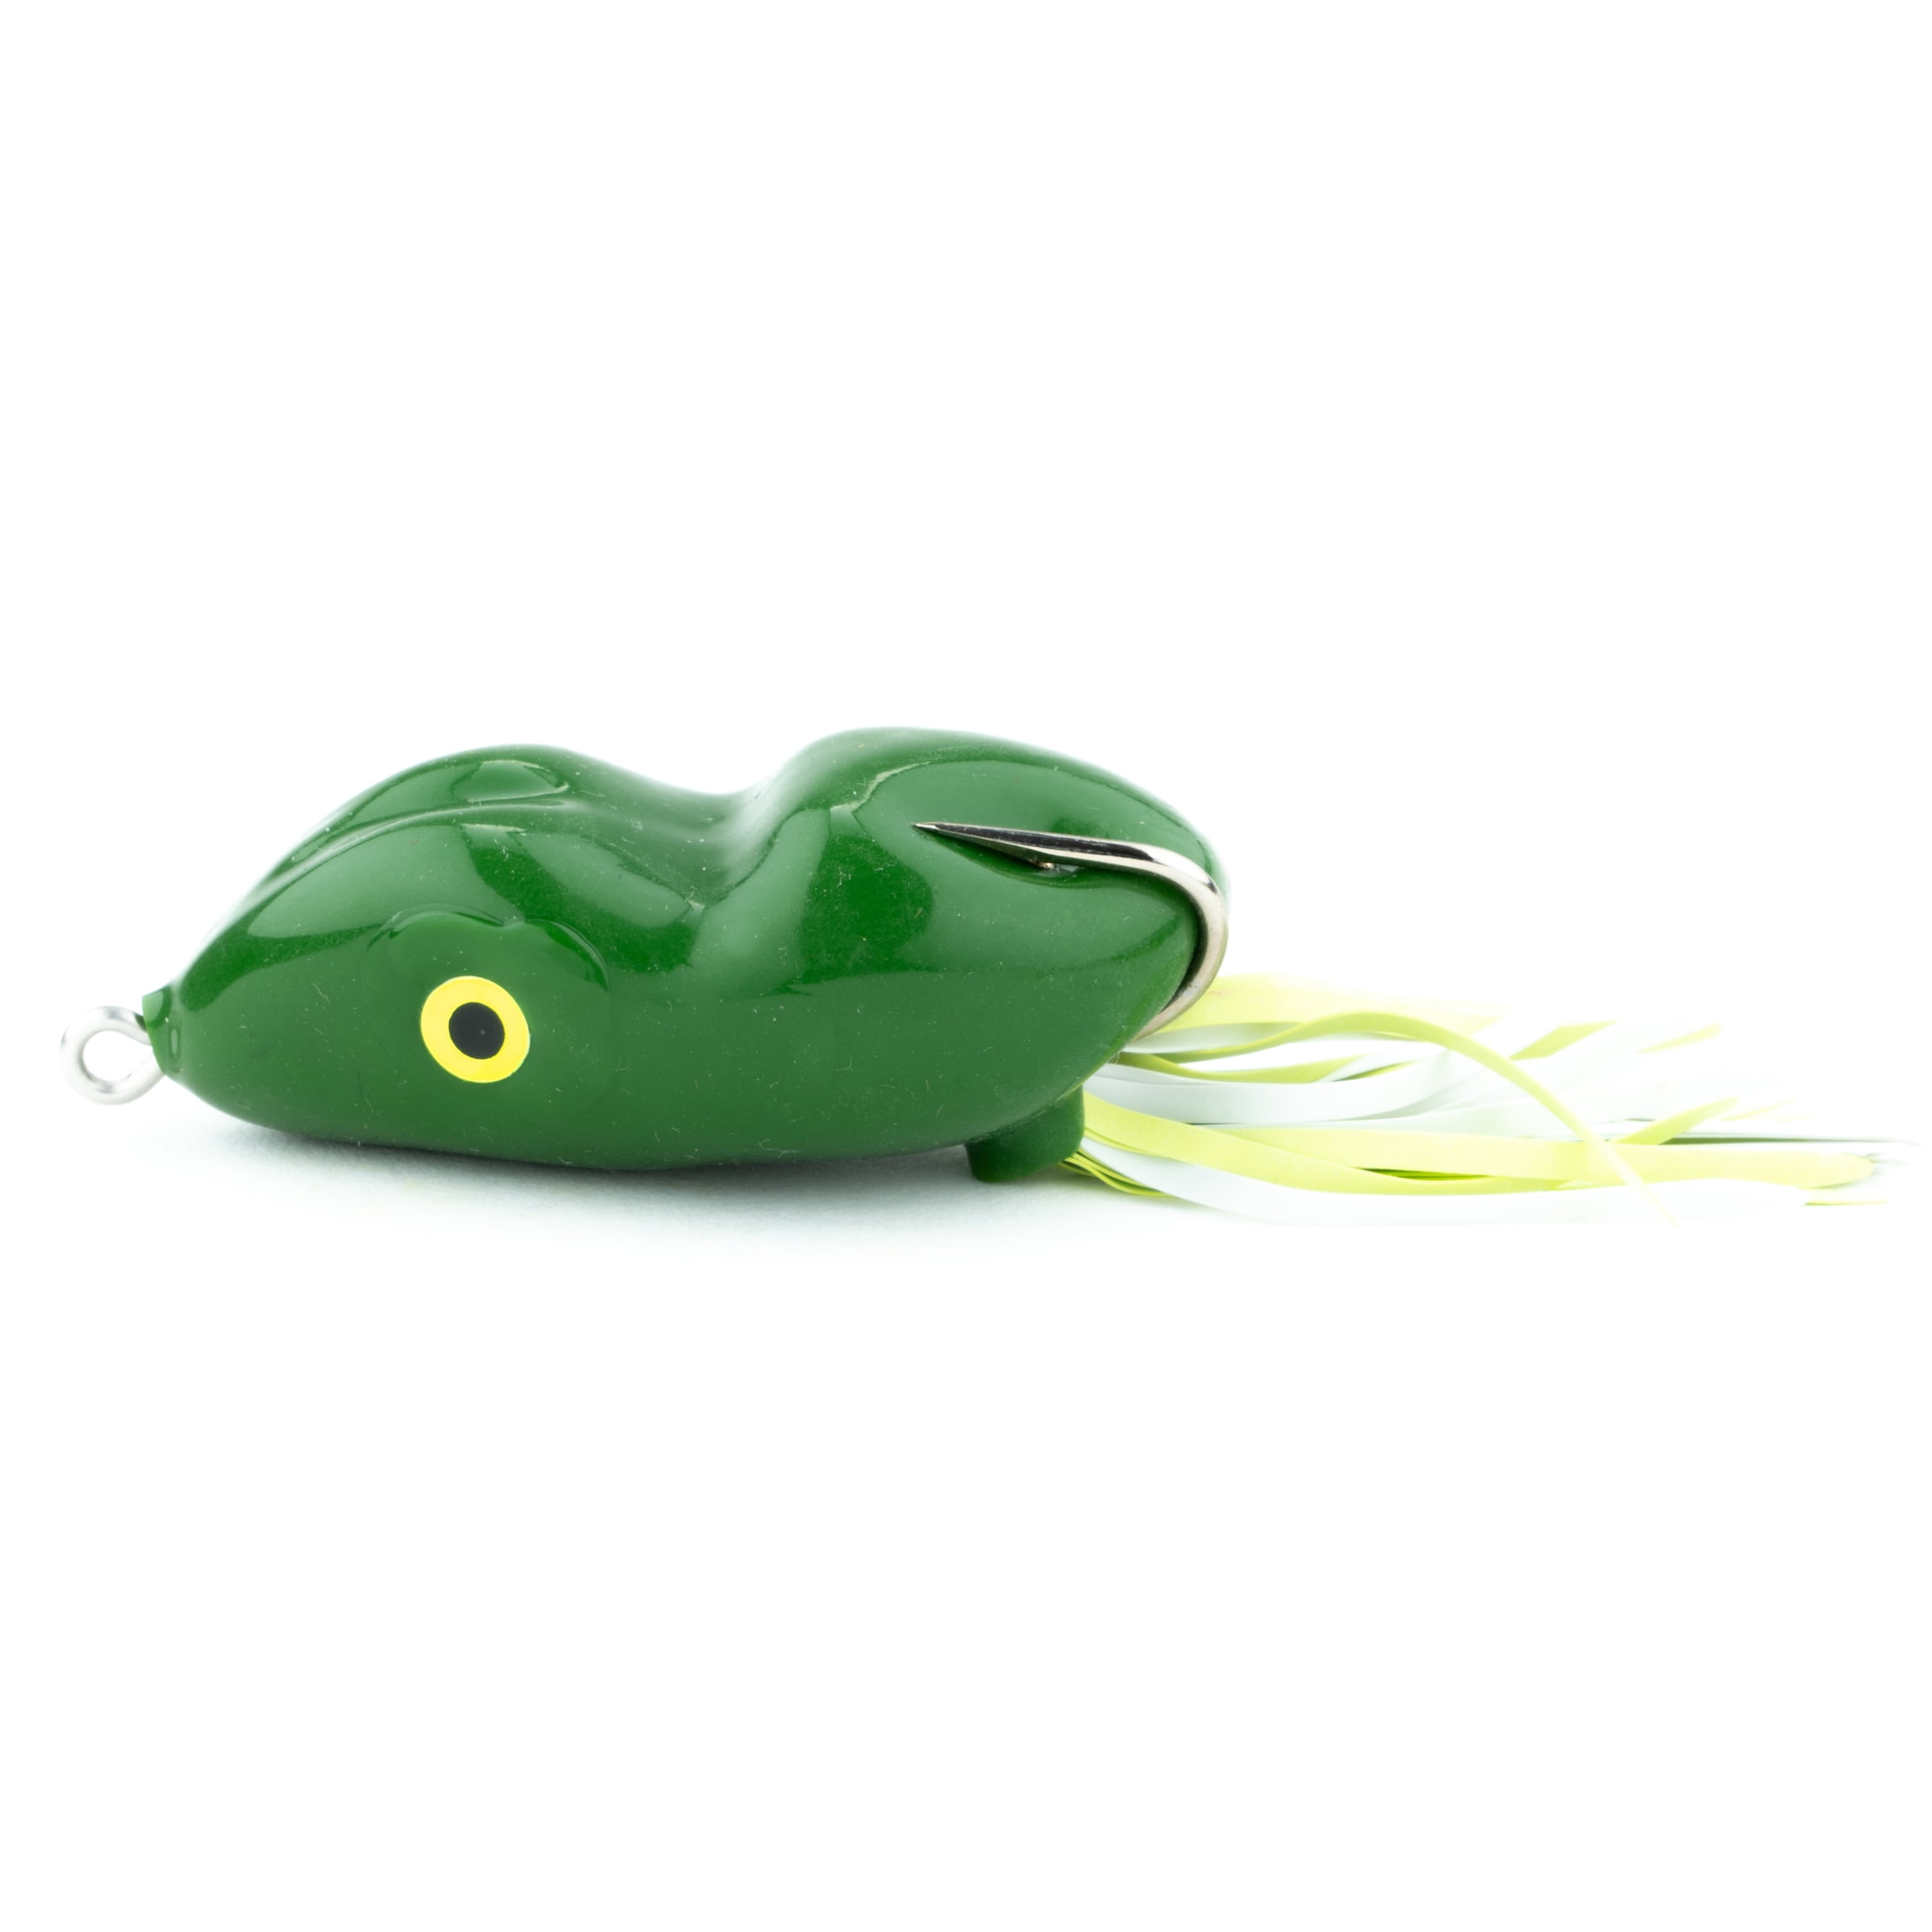  SOUTHERN LURE Scum Frog Tiny Toad Popper Topwater Bass Fishing  Hollow Body Frog Lure with Weedless Hooks, White, One Size : Fishing  Equipment : Sports & Outdoors